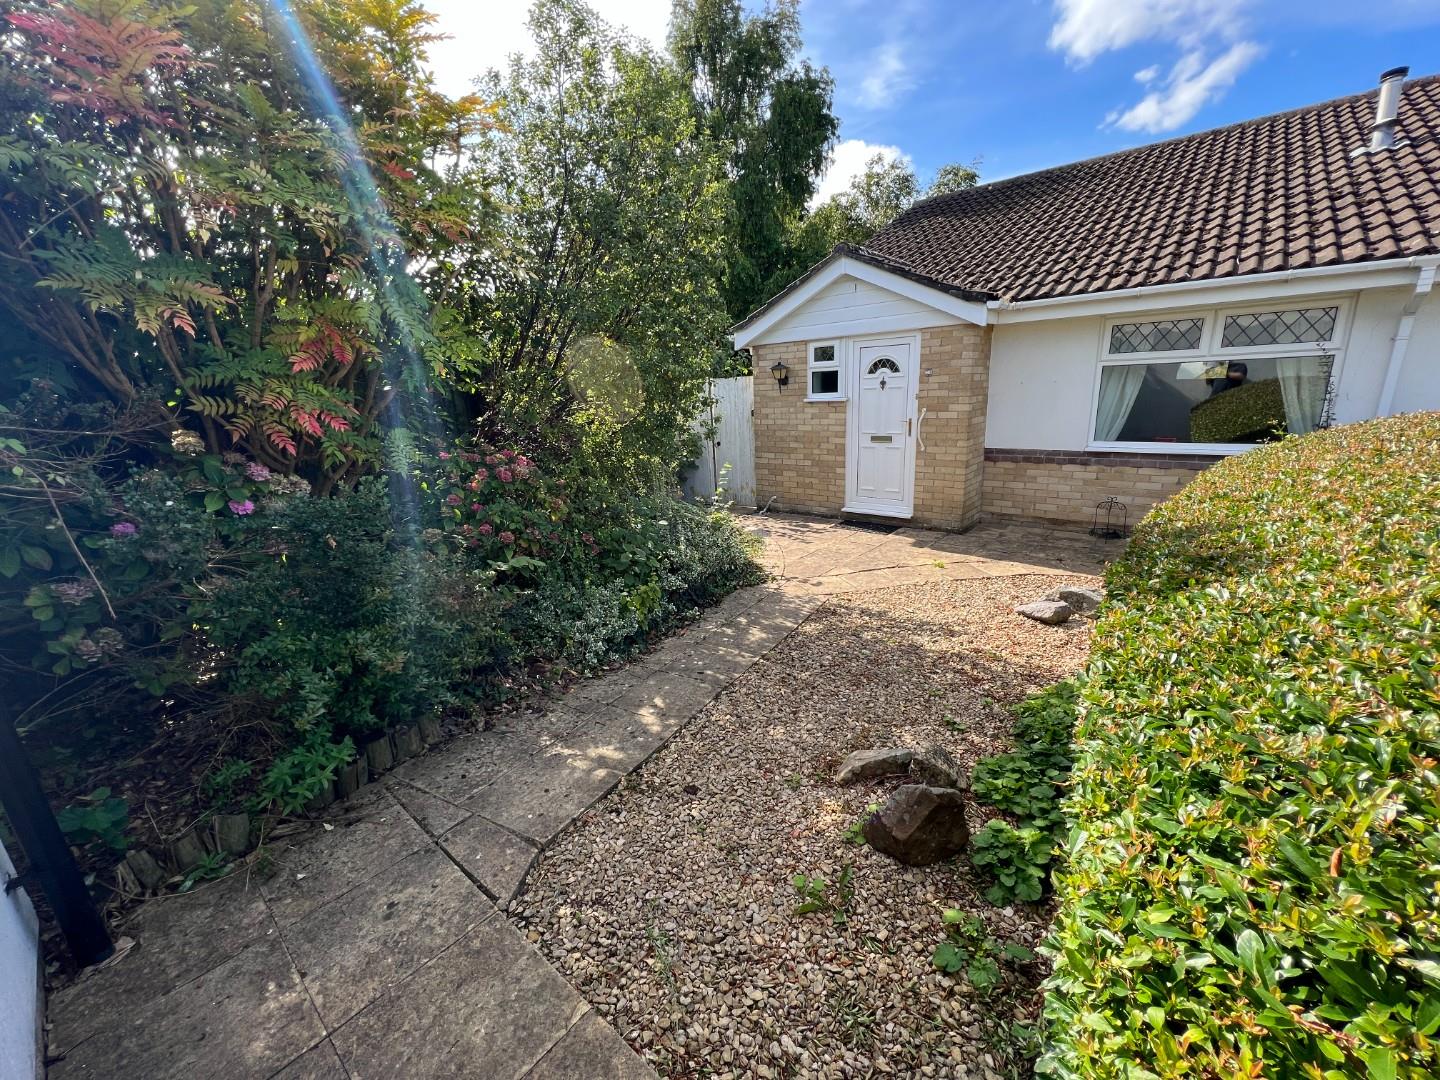 2 bed semi-detached bungalow for sale in Maes-Y-Crochan, Cardiff - Property Image 1